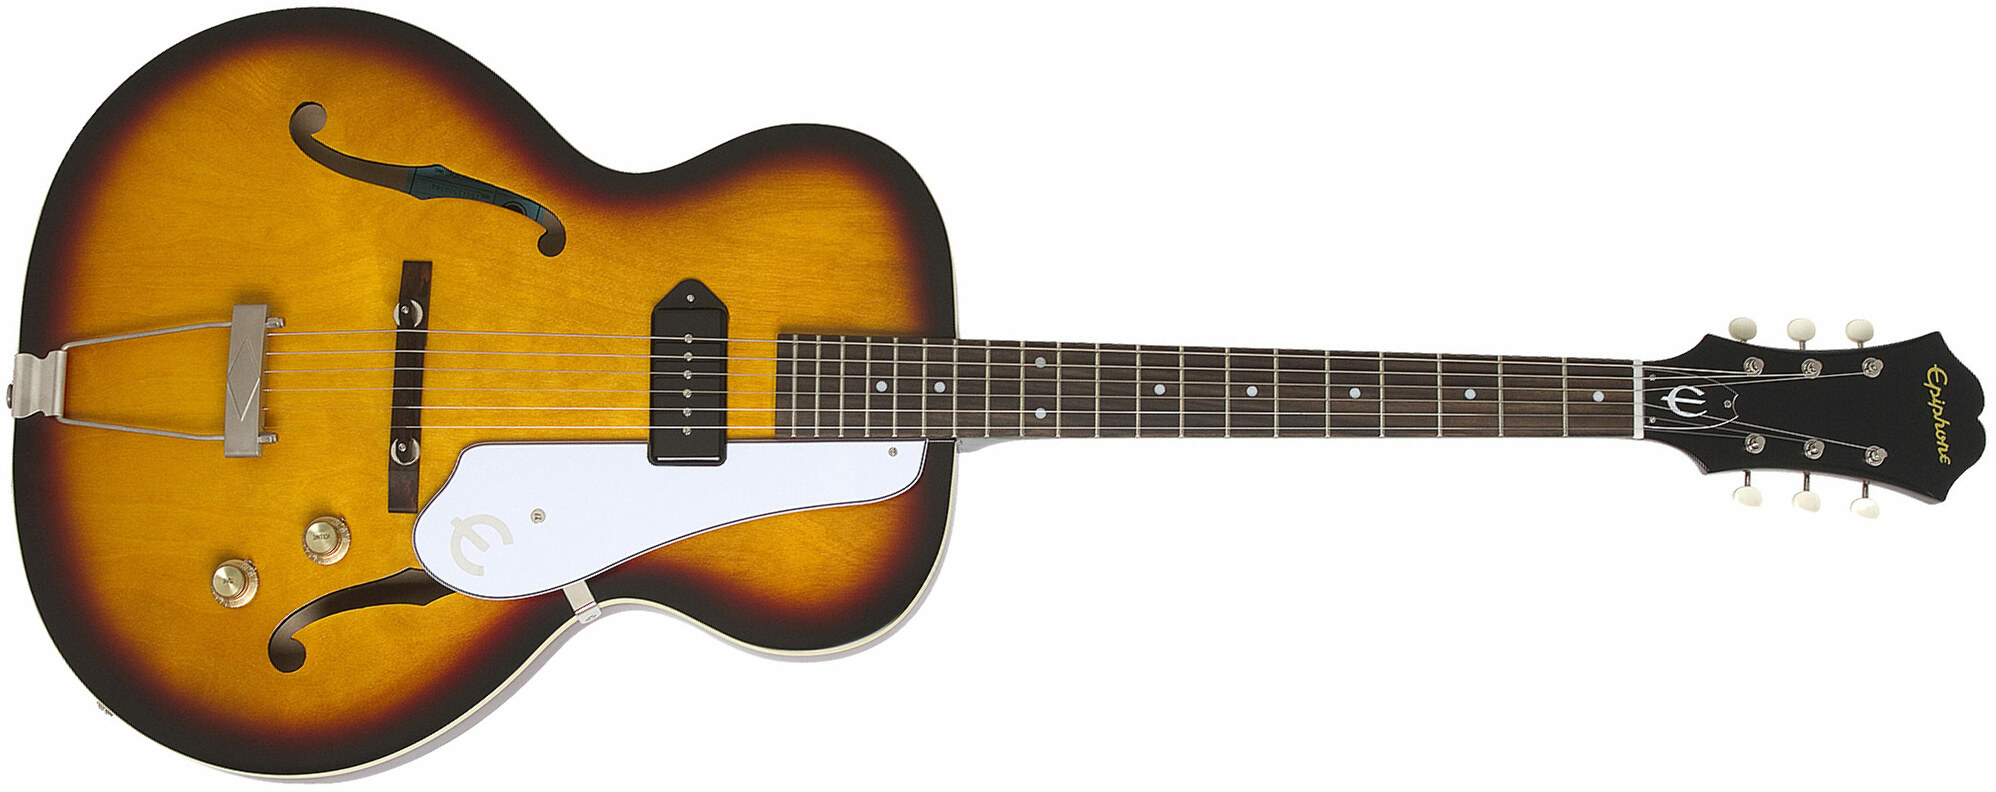 Epiphone Inspired By 1966 Century 2016 - Aged Gloss Vintage Sunburst - Semi-hollow electric guitar - Main picture